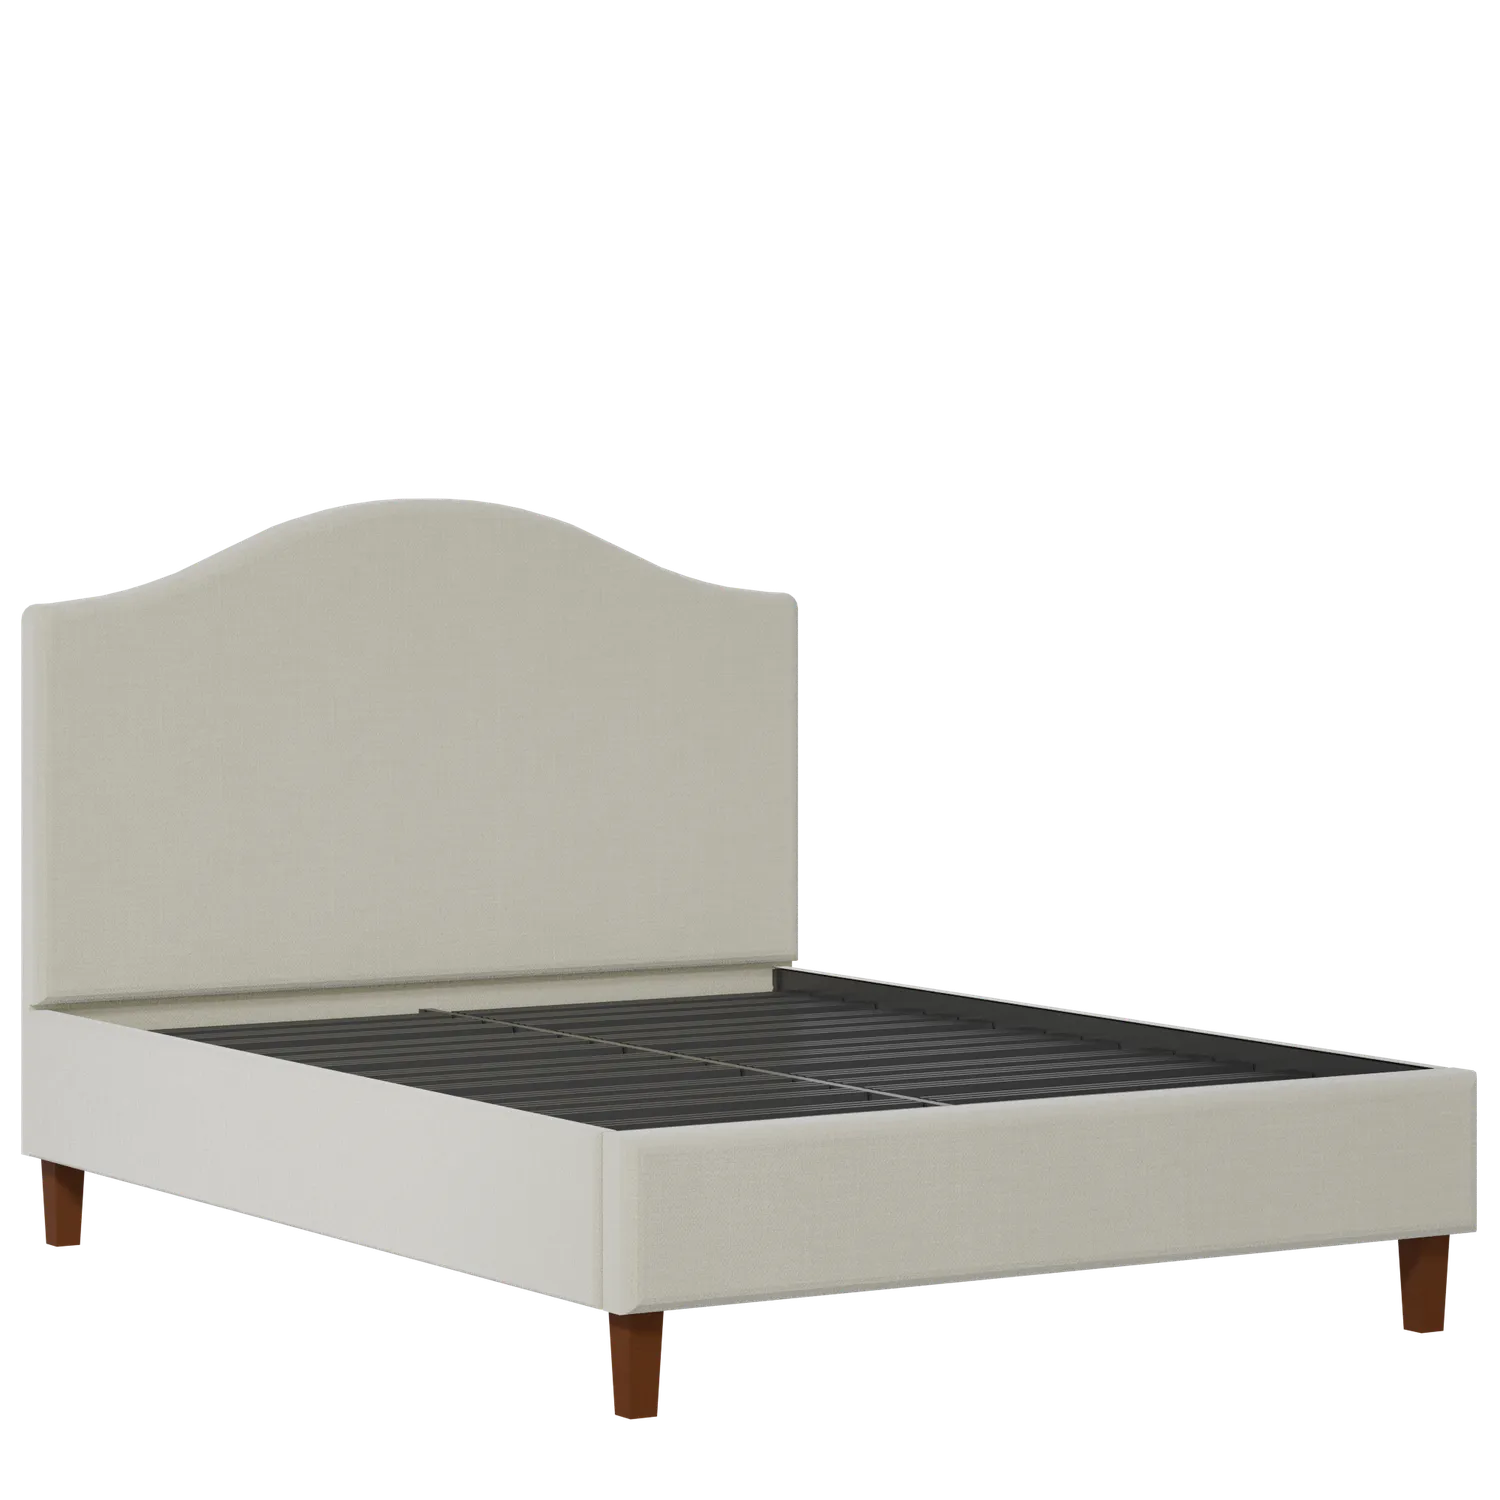 Burley Slim upholstered bed in oatmeal fabric